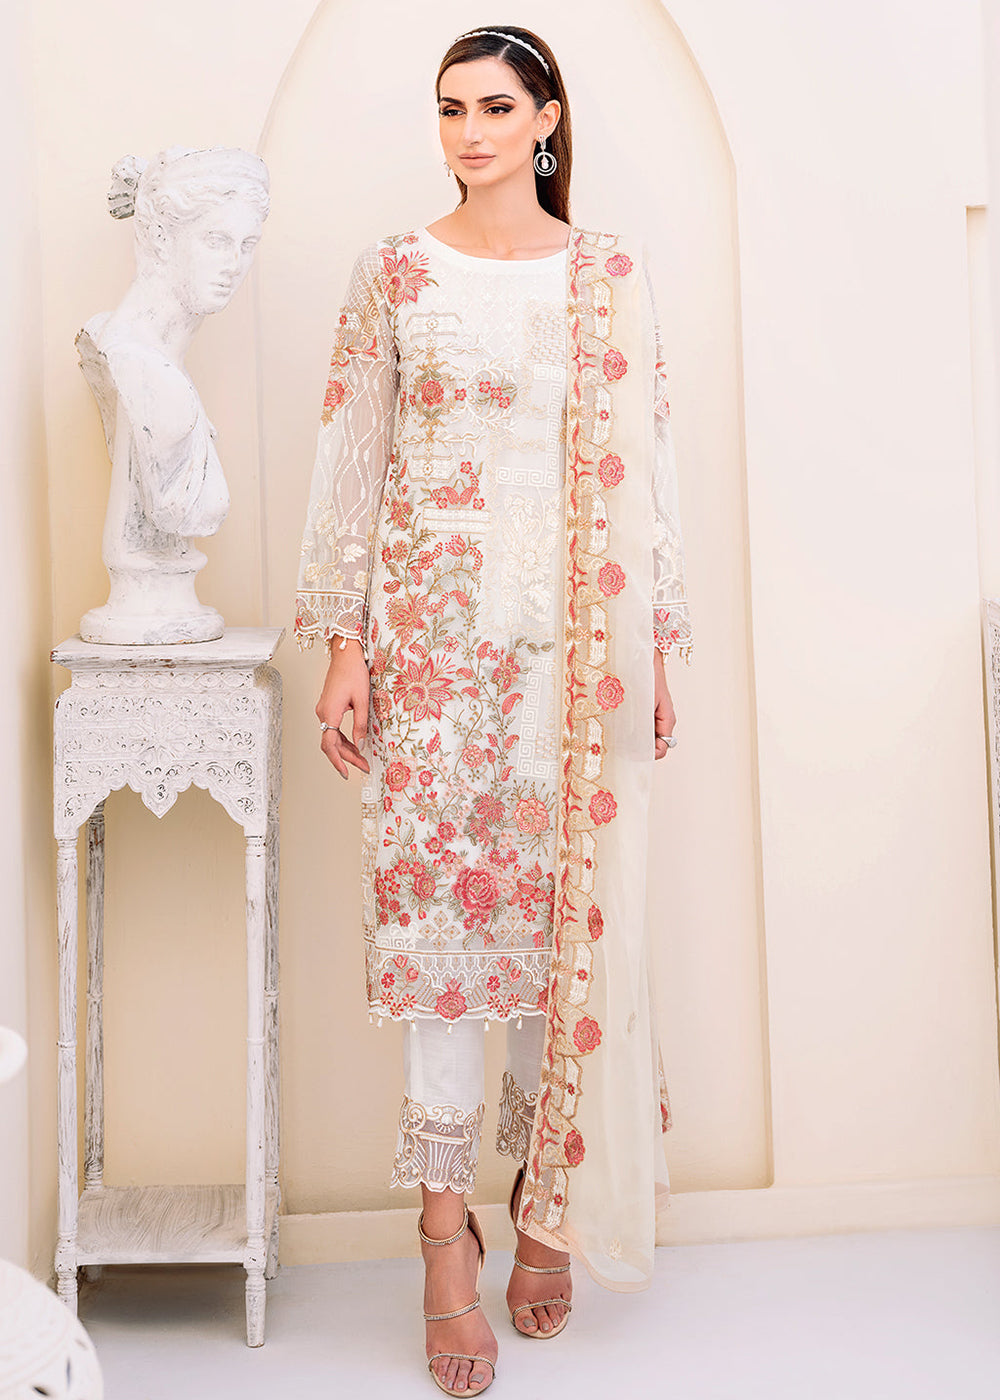 Buy Now White Embroidered Suit - Chiffon Vol 23 by Ramsha - #F-2308 Online in USA, UK, Canada & Worldwide at Empress Clothing.